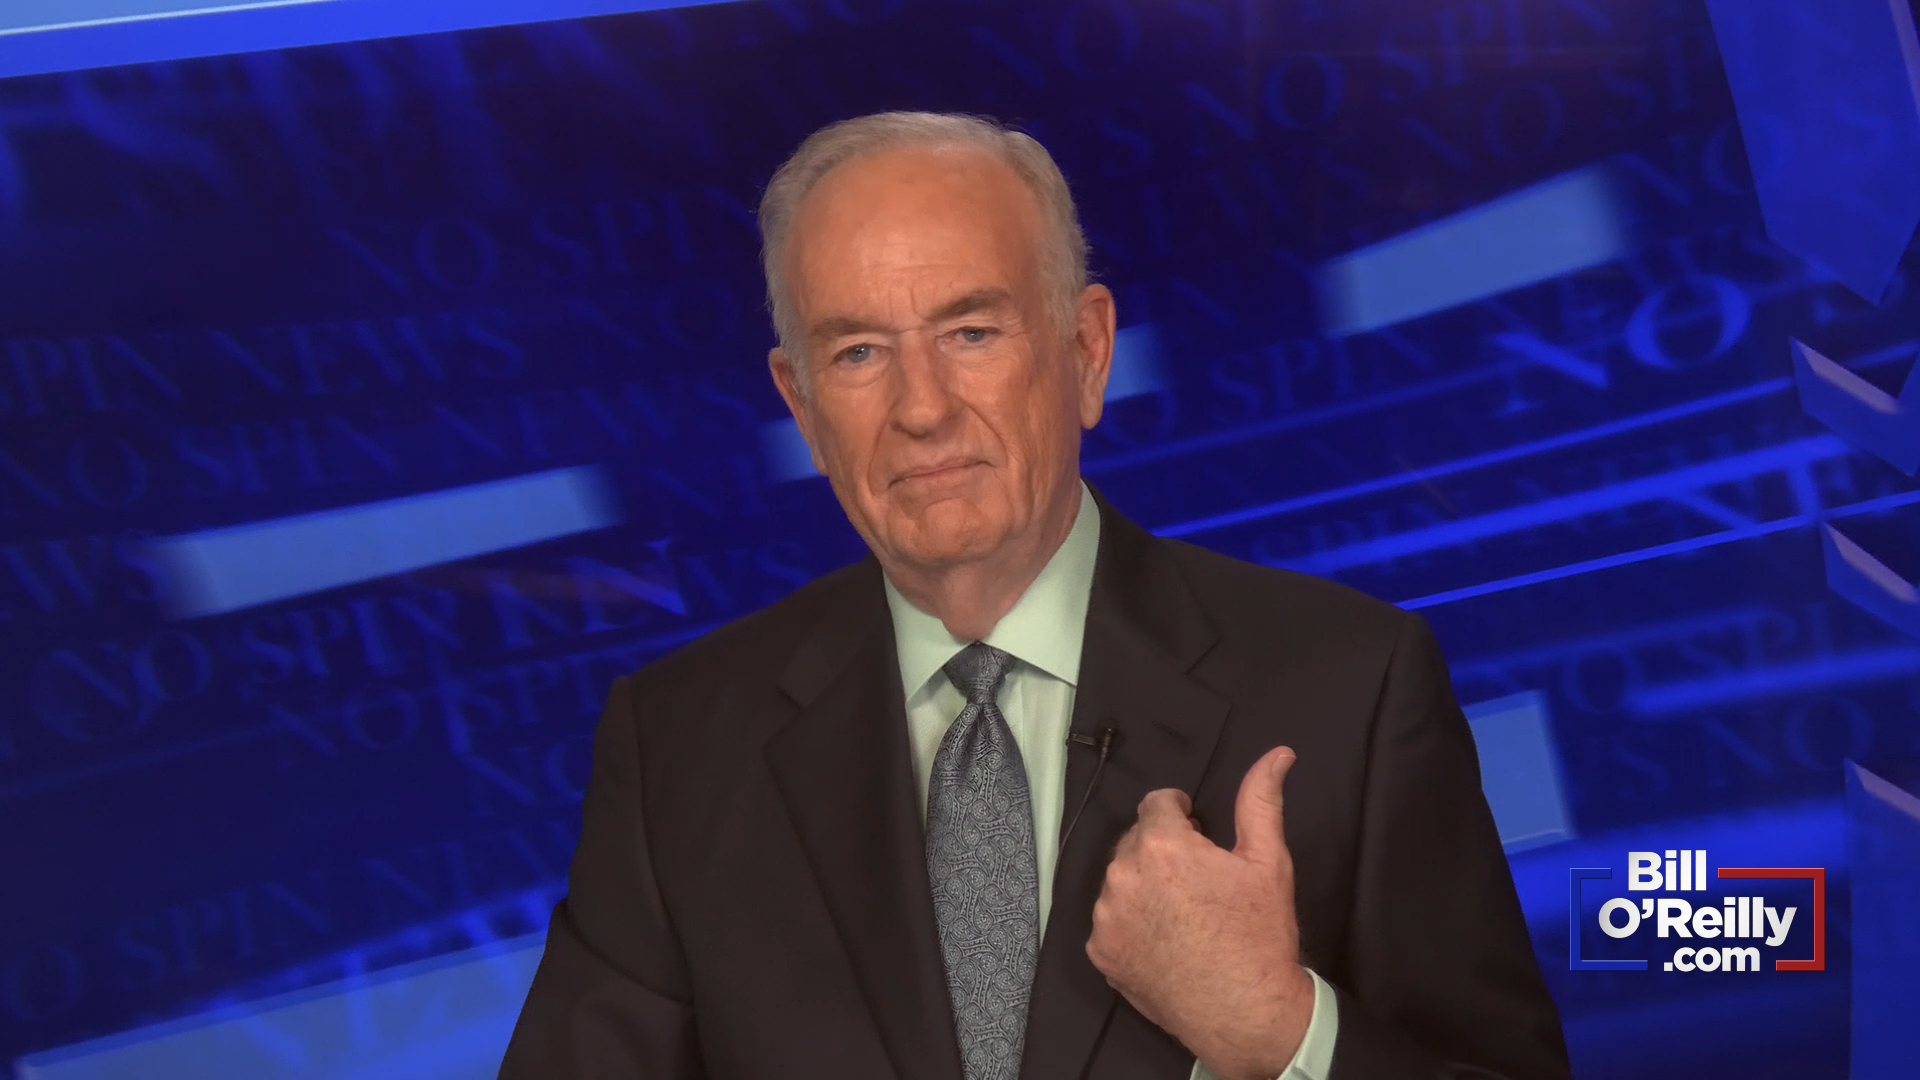 O'Reilly: 'There Was No Collusion'